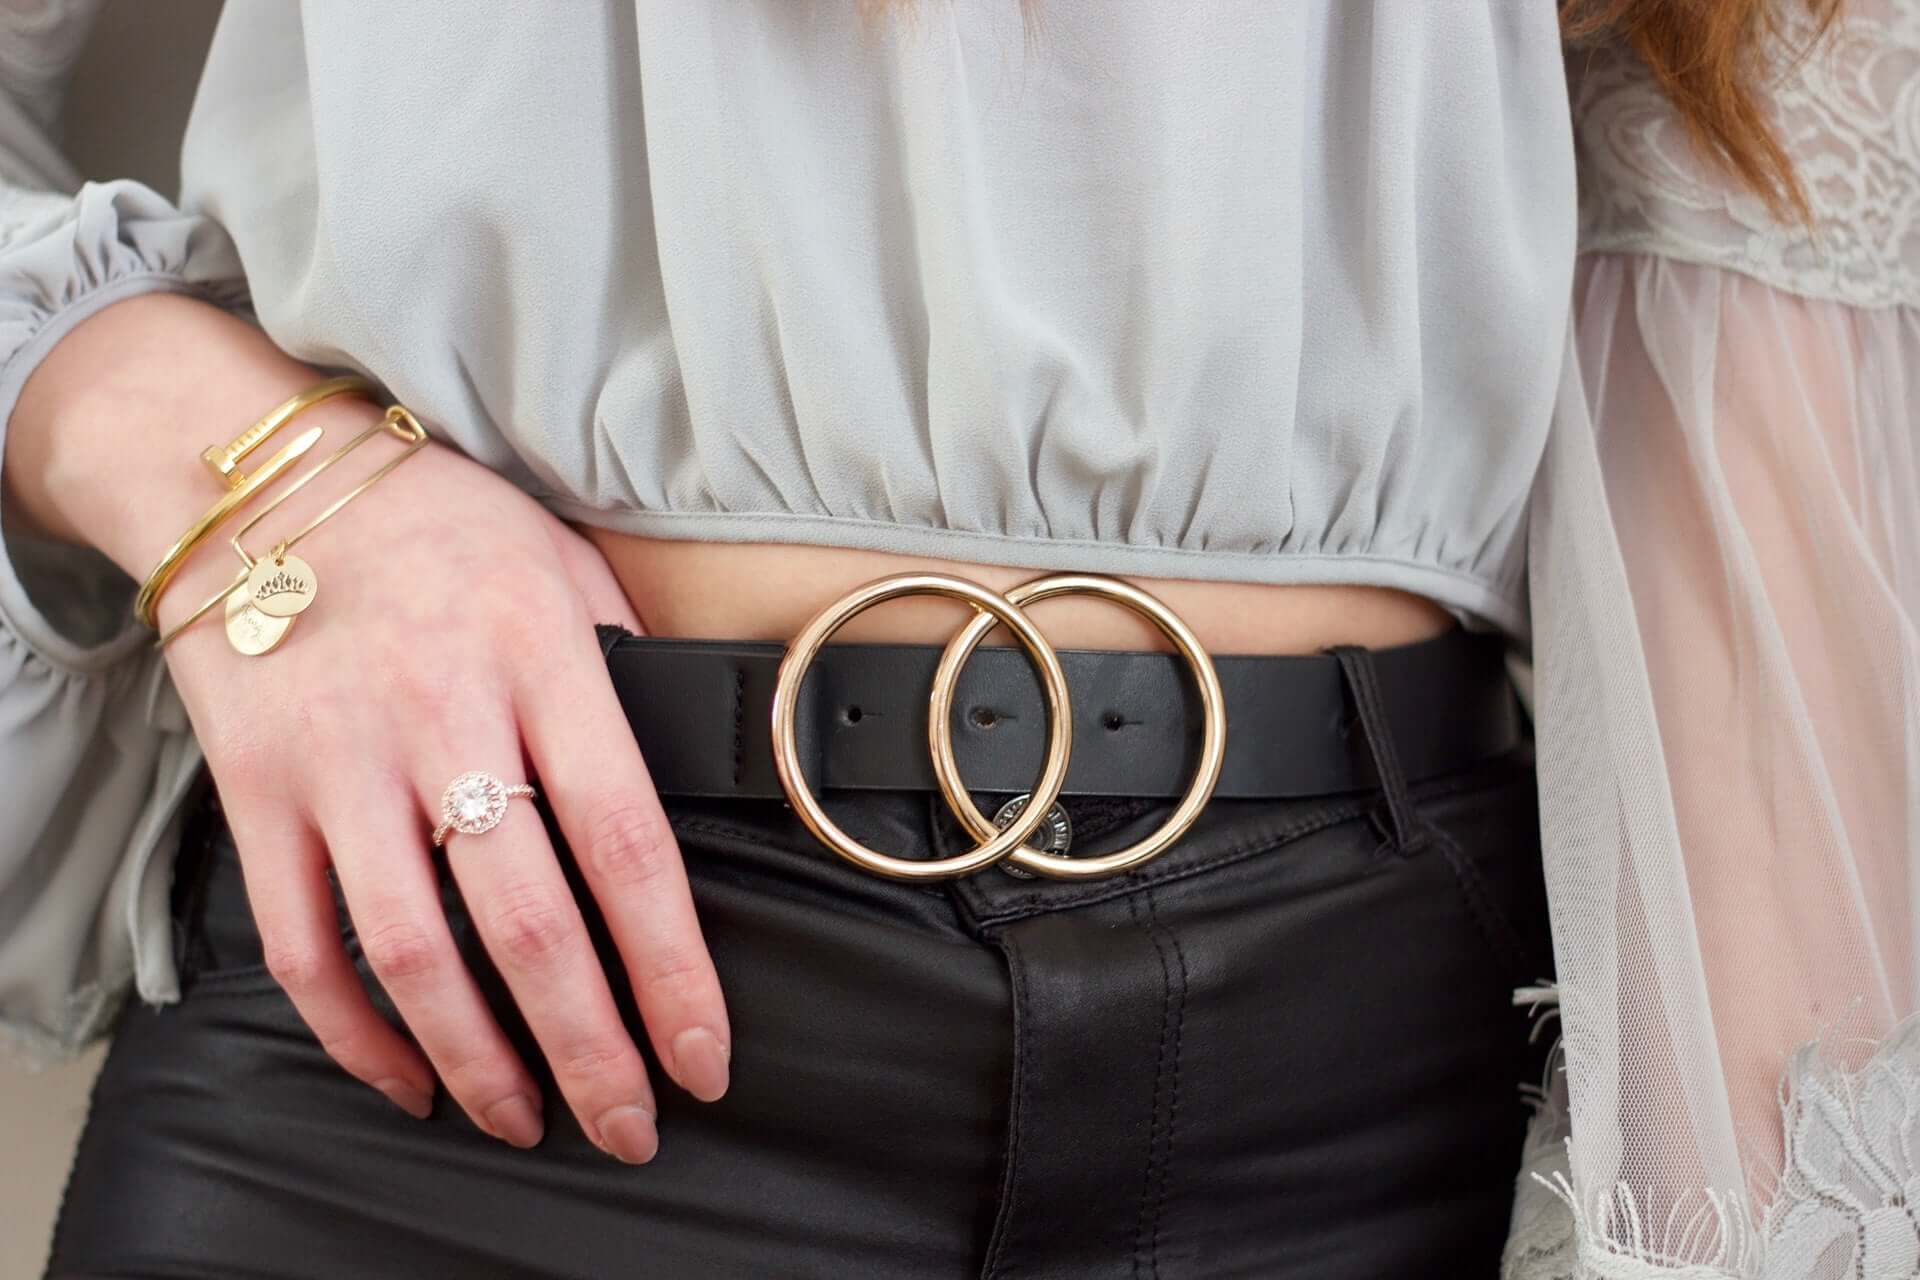 A close shot of a woman's midsection. She wears a grey blouse and black jeans, and has a black belt with a buckle composed of two linked circles.